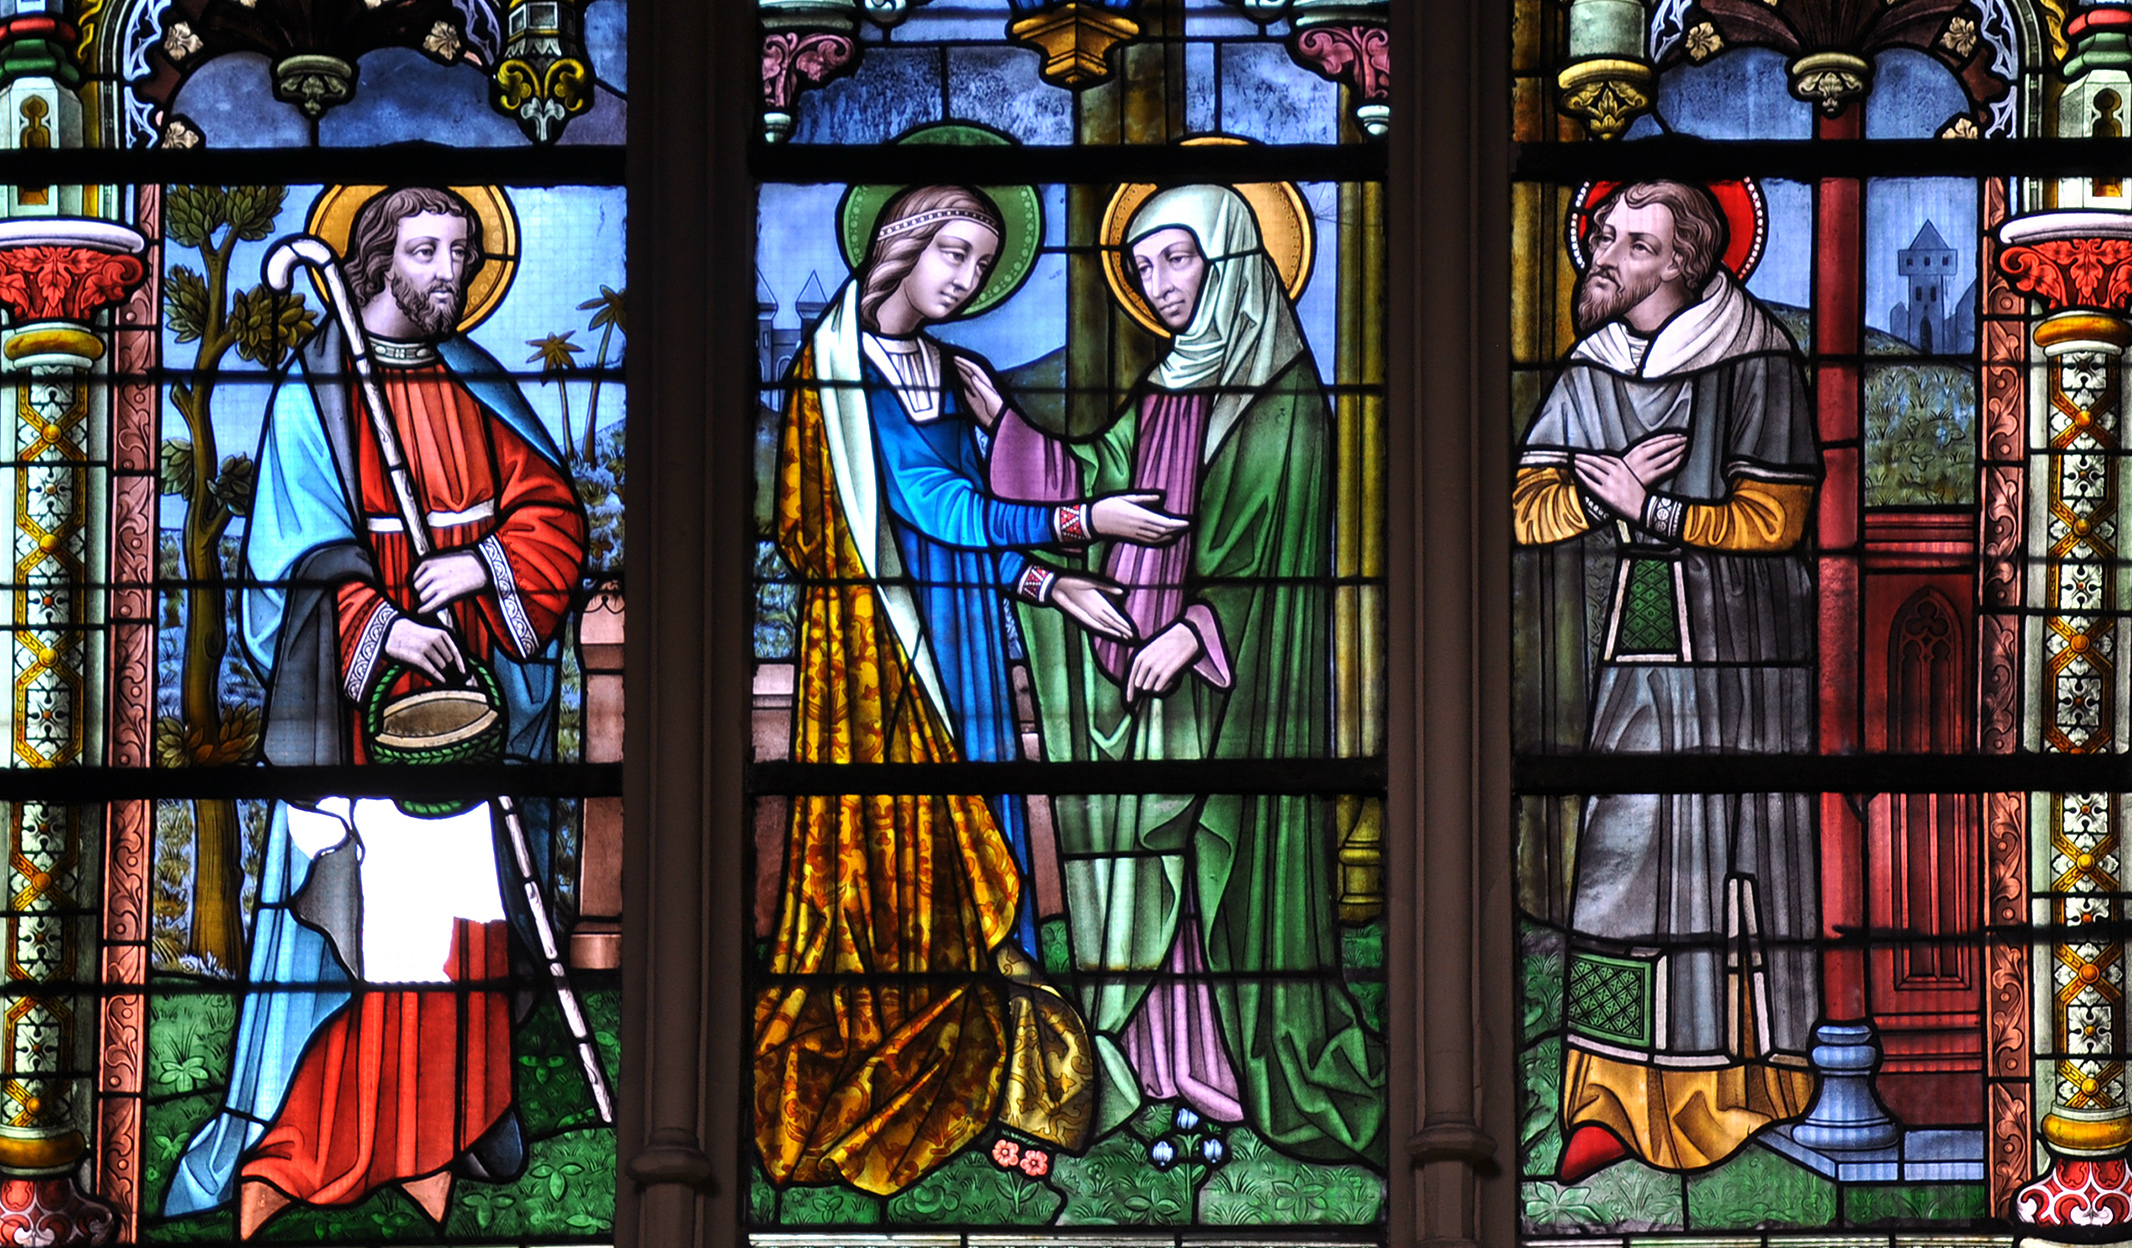 A stained glass window in Saint Jacques's Church